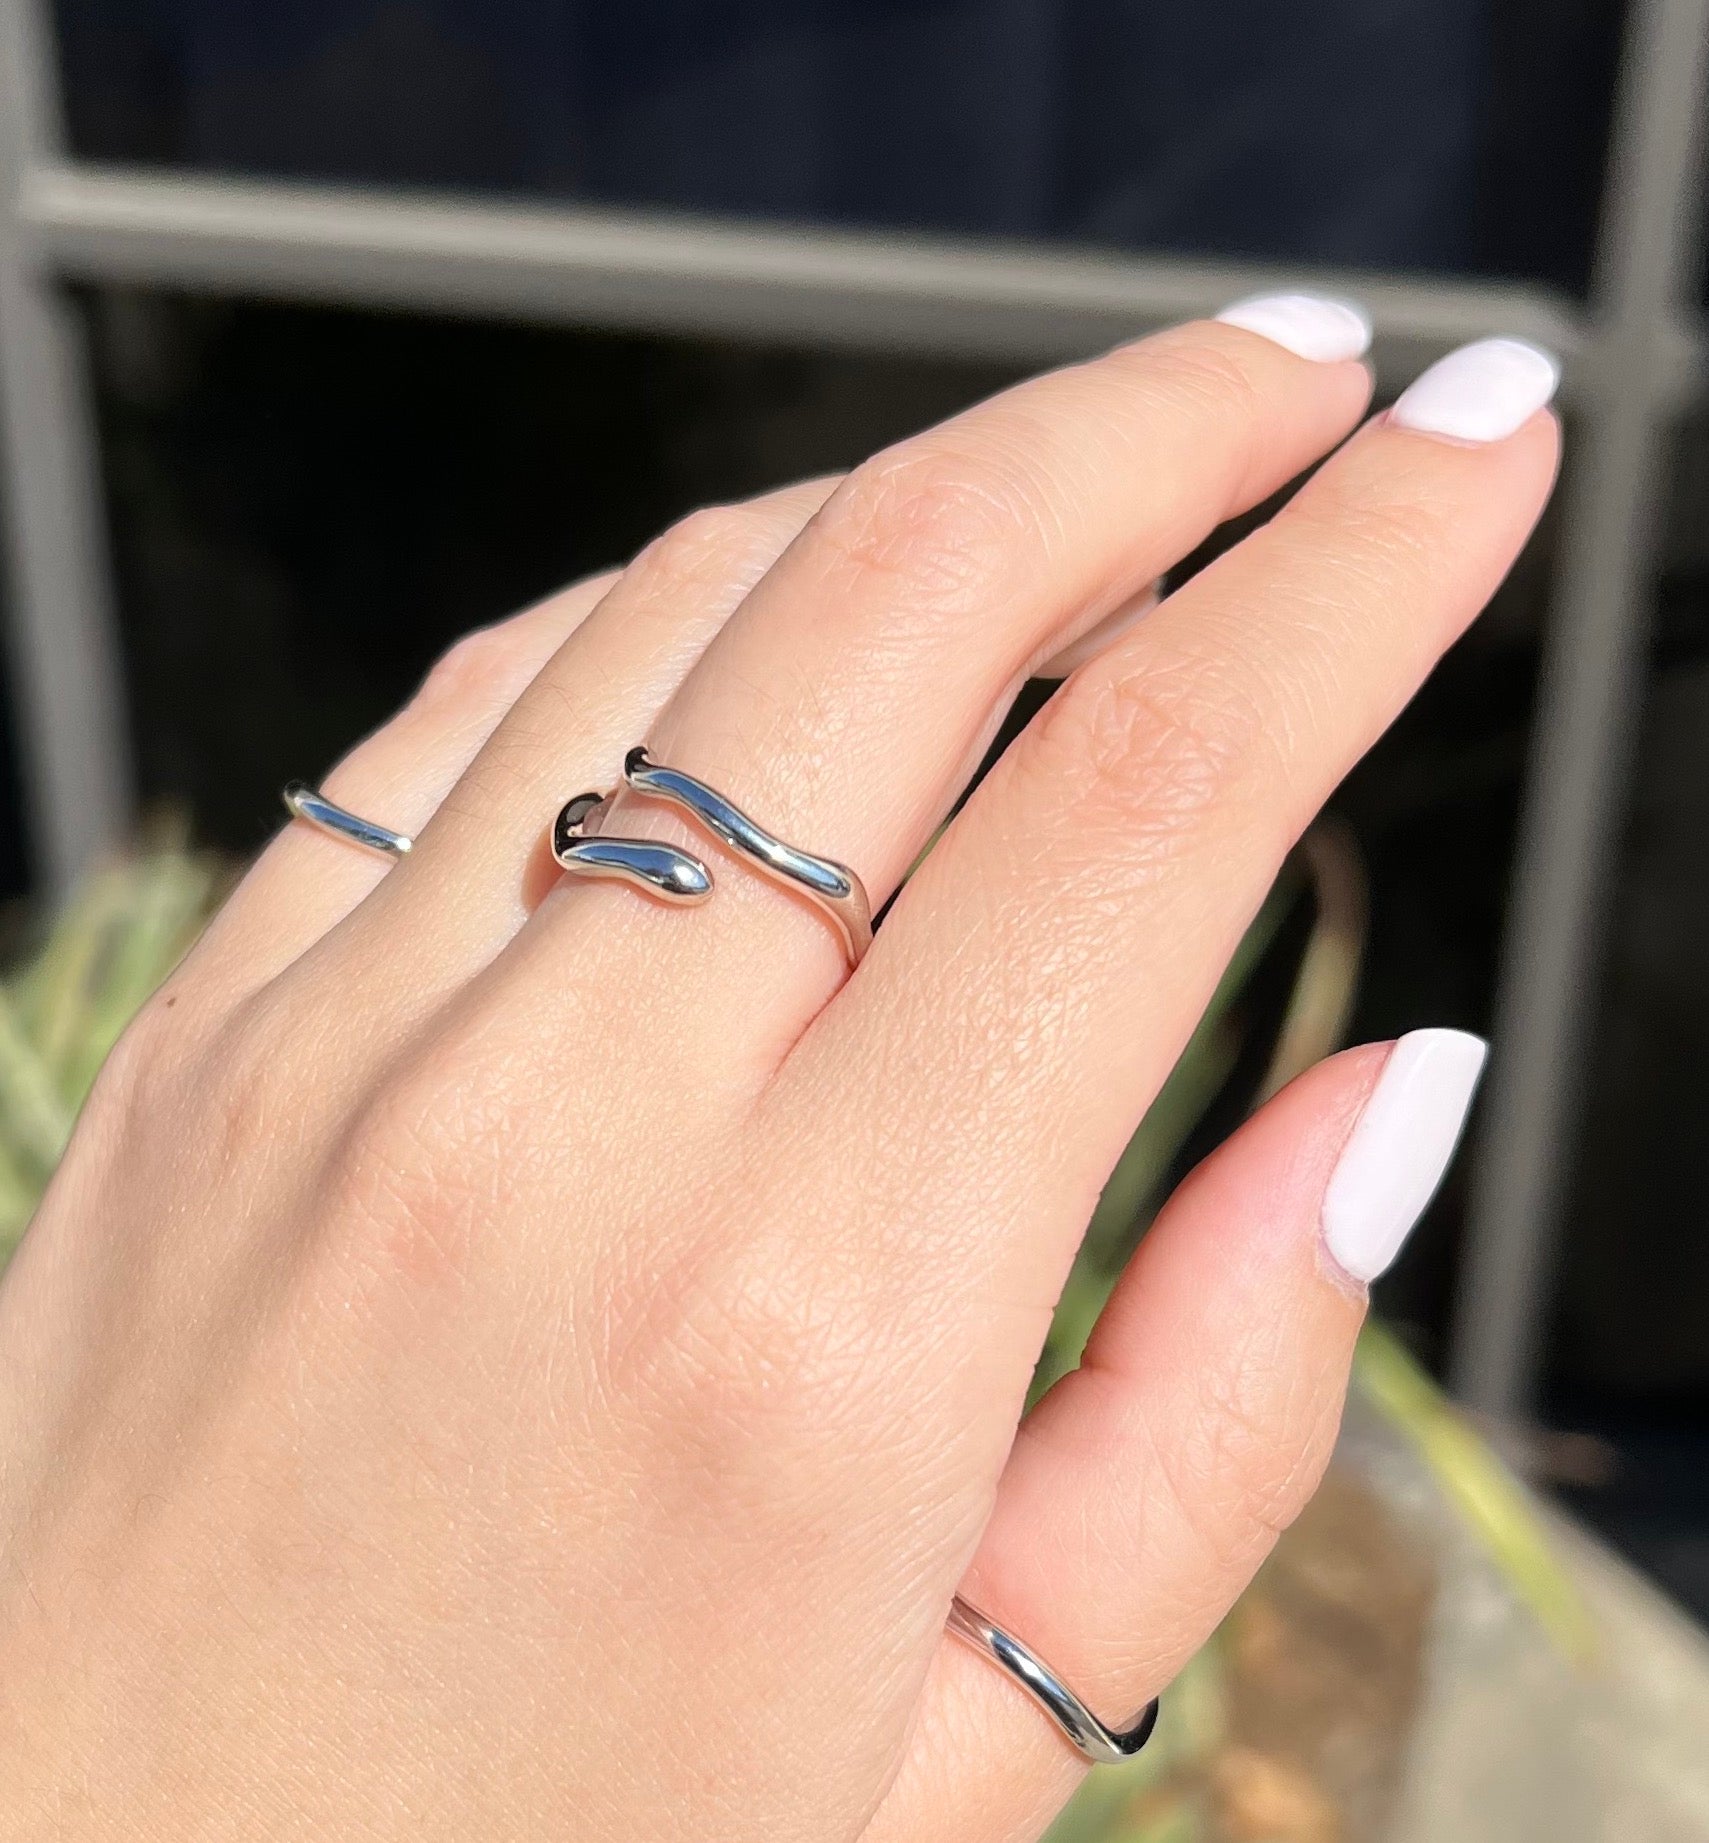 Wavy Adjustable Sterling Silver Ring - Flaire & Co.